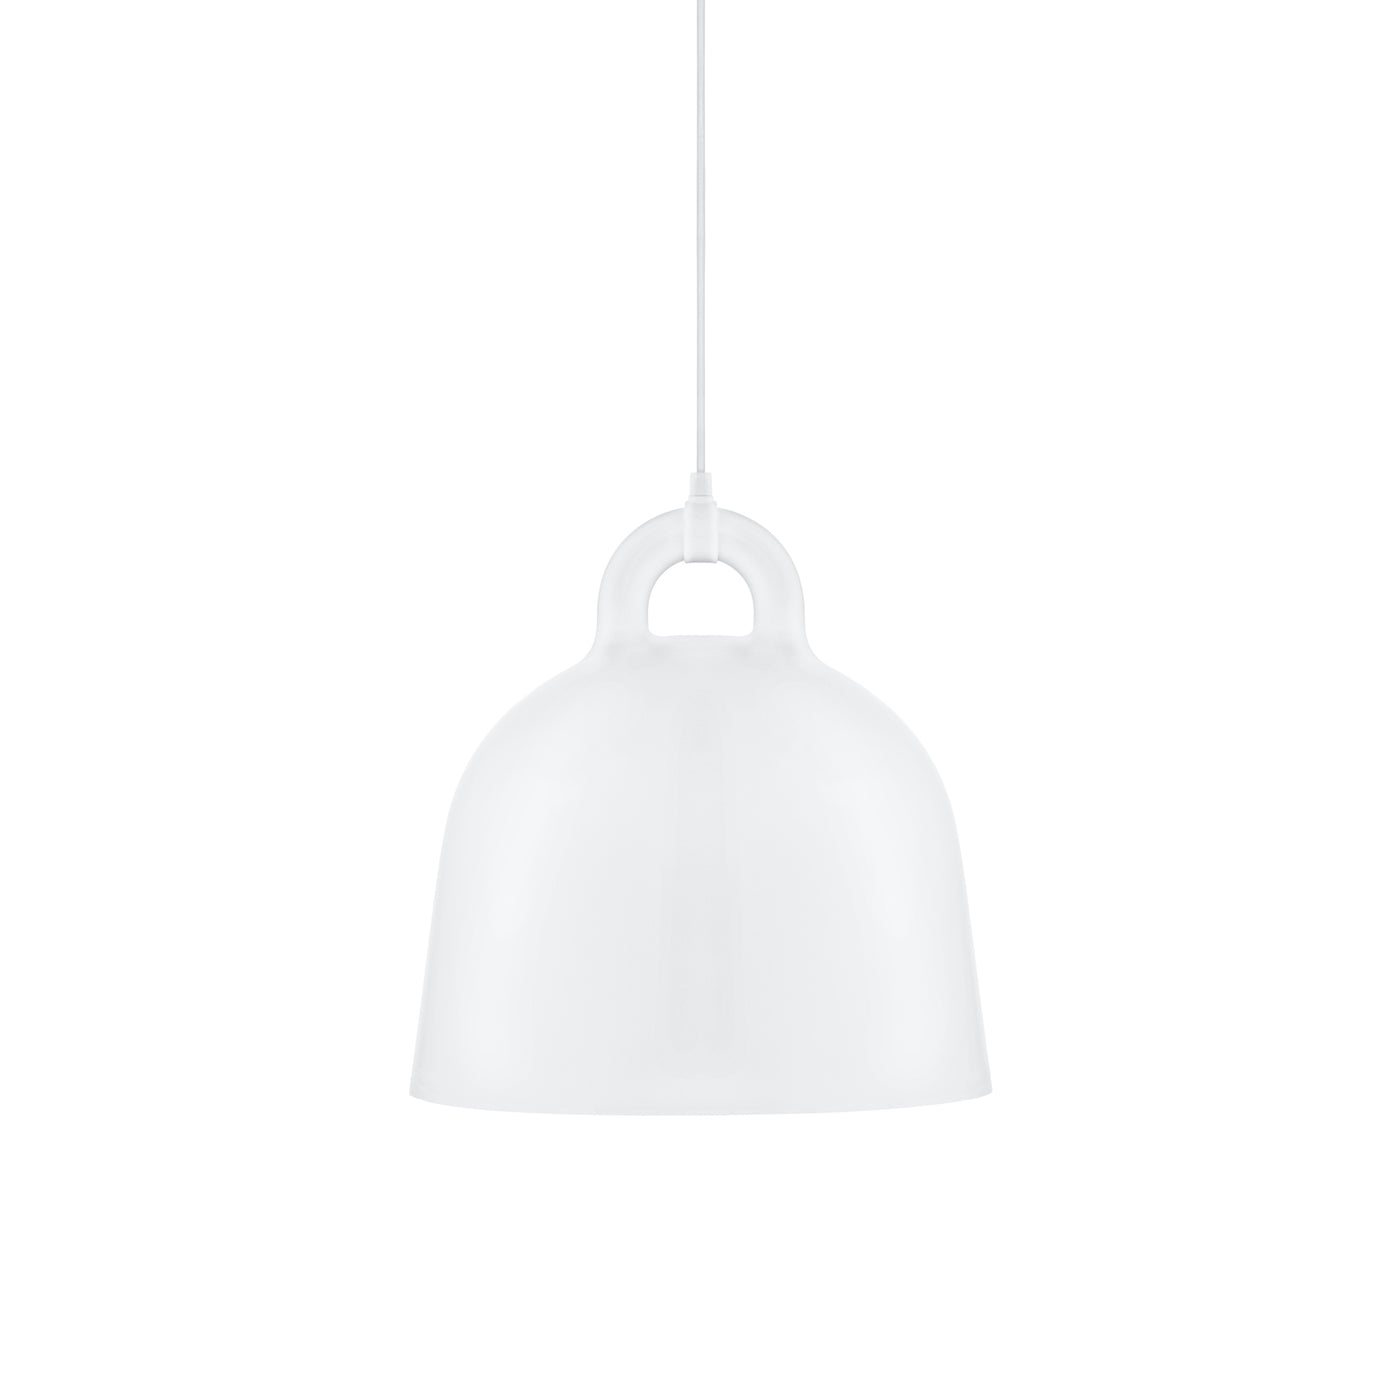 Norman Copenhagen Bell Pendant Lamp in white. Free UK delivery from someday designs #size_medium